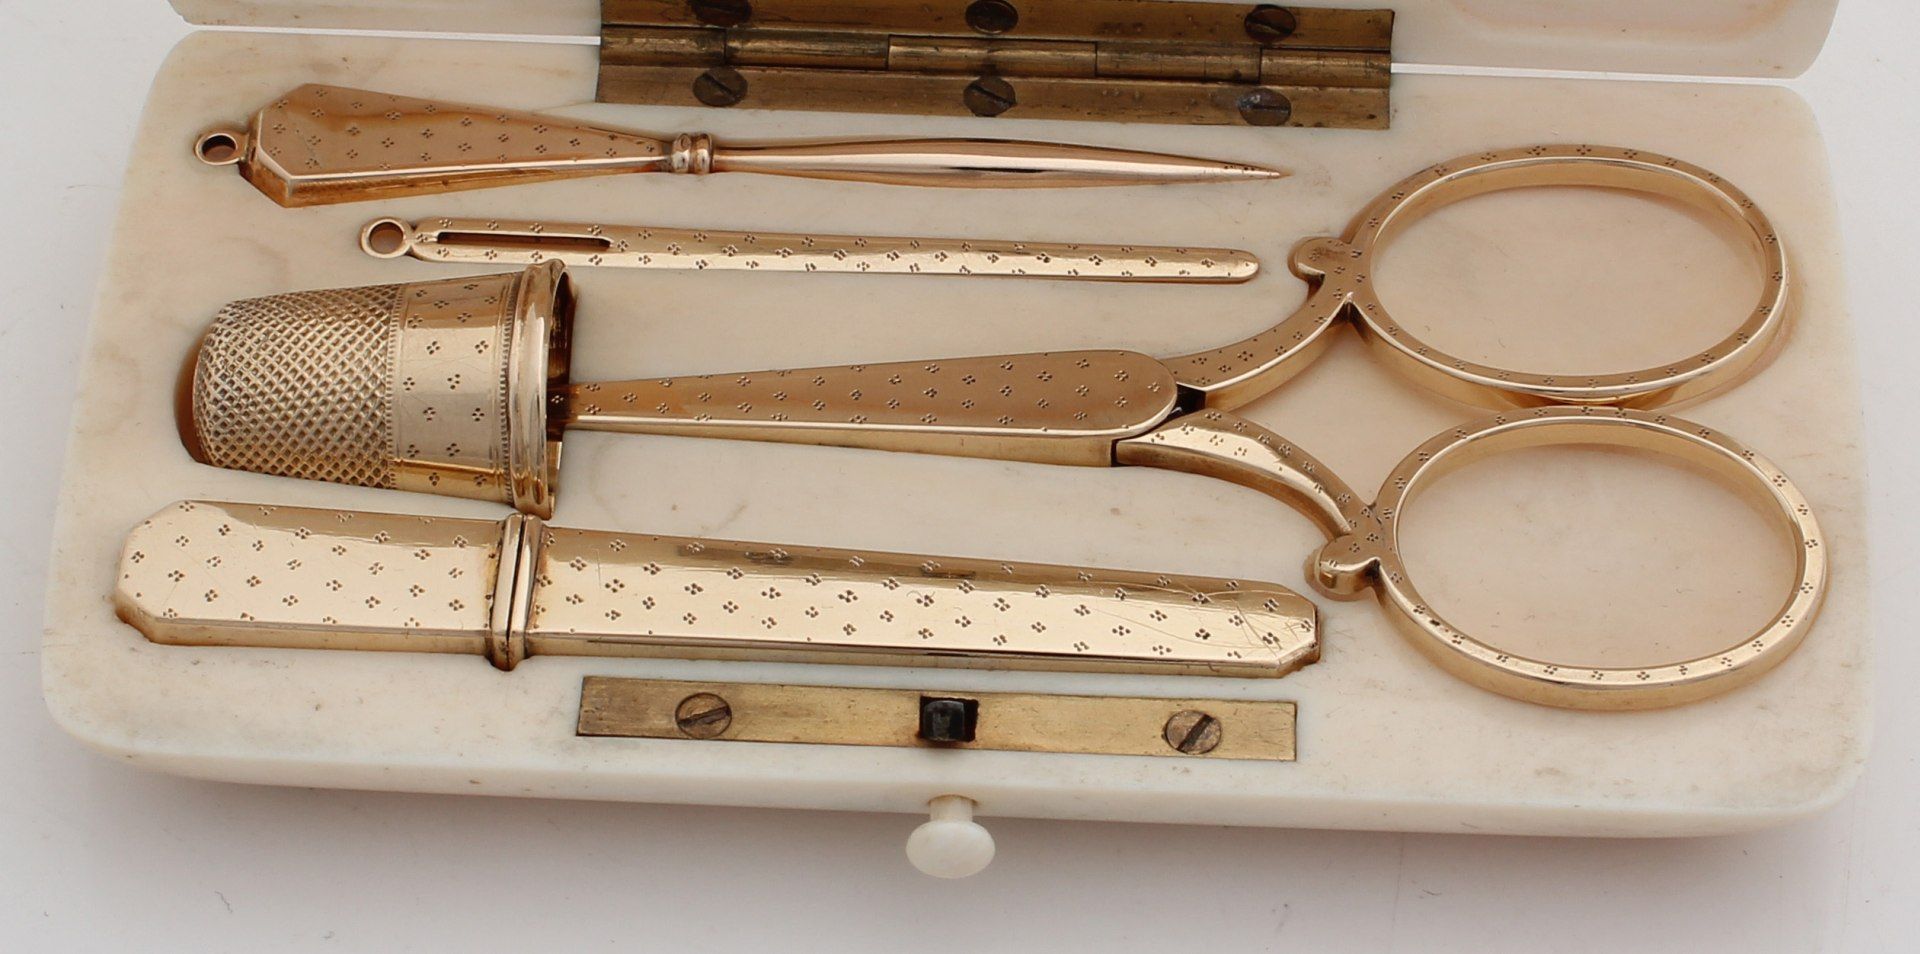 Six-piece gold sewing kit, 585/000, consisting of a sheath with scissors, awl, broach, thimble and - Image 2 of 2